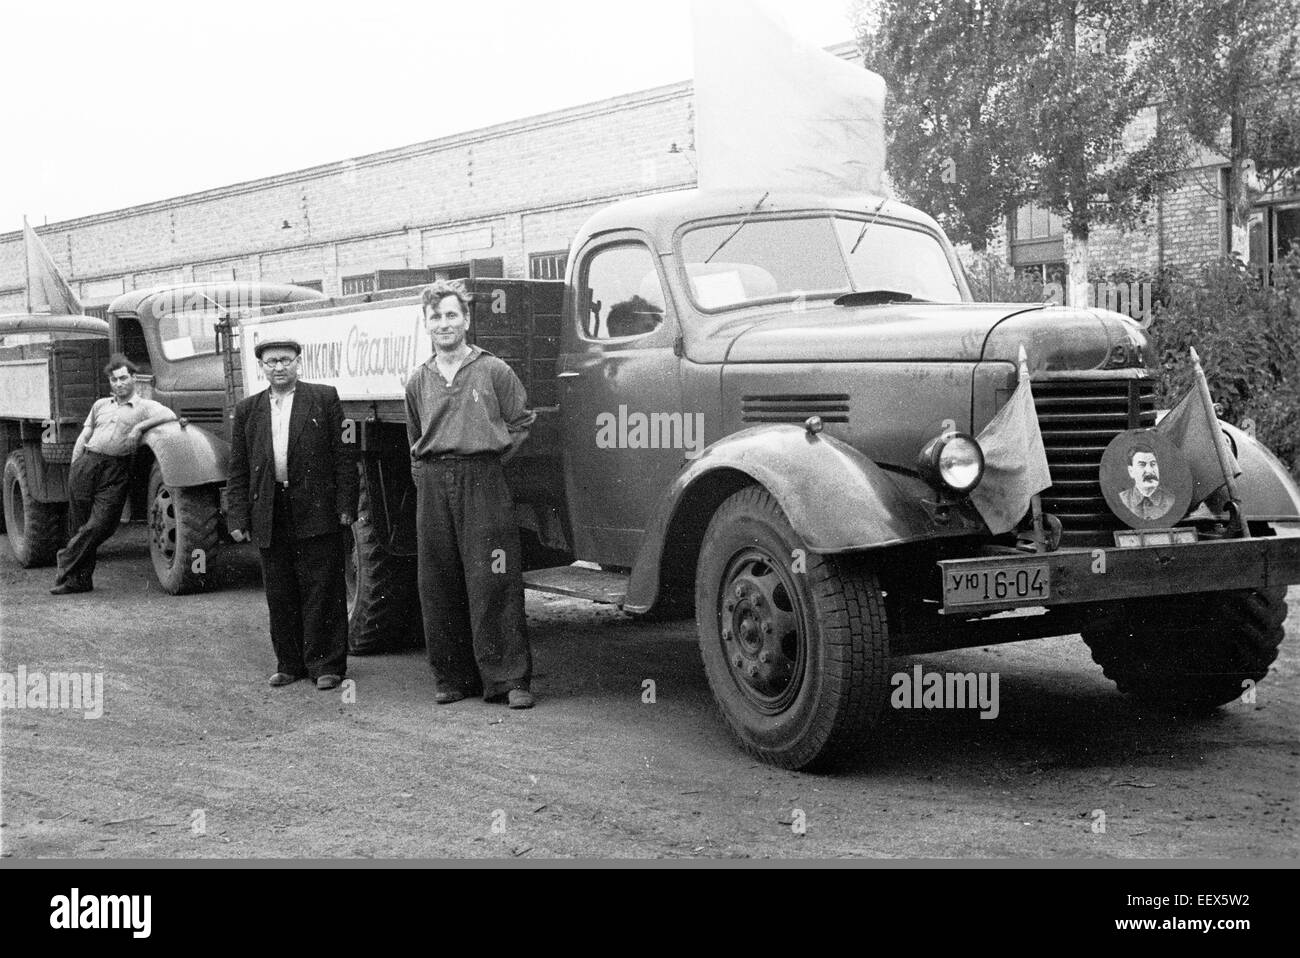 Truck drivers Black and White Stock Photos & Images - Alamy